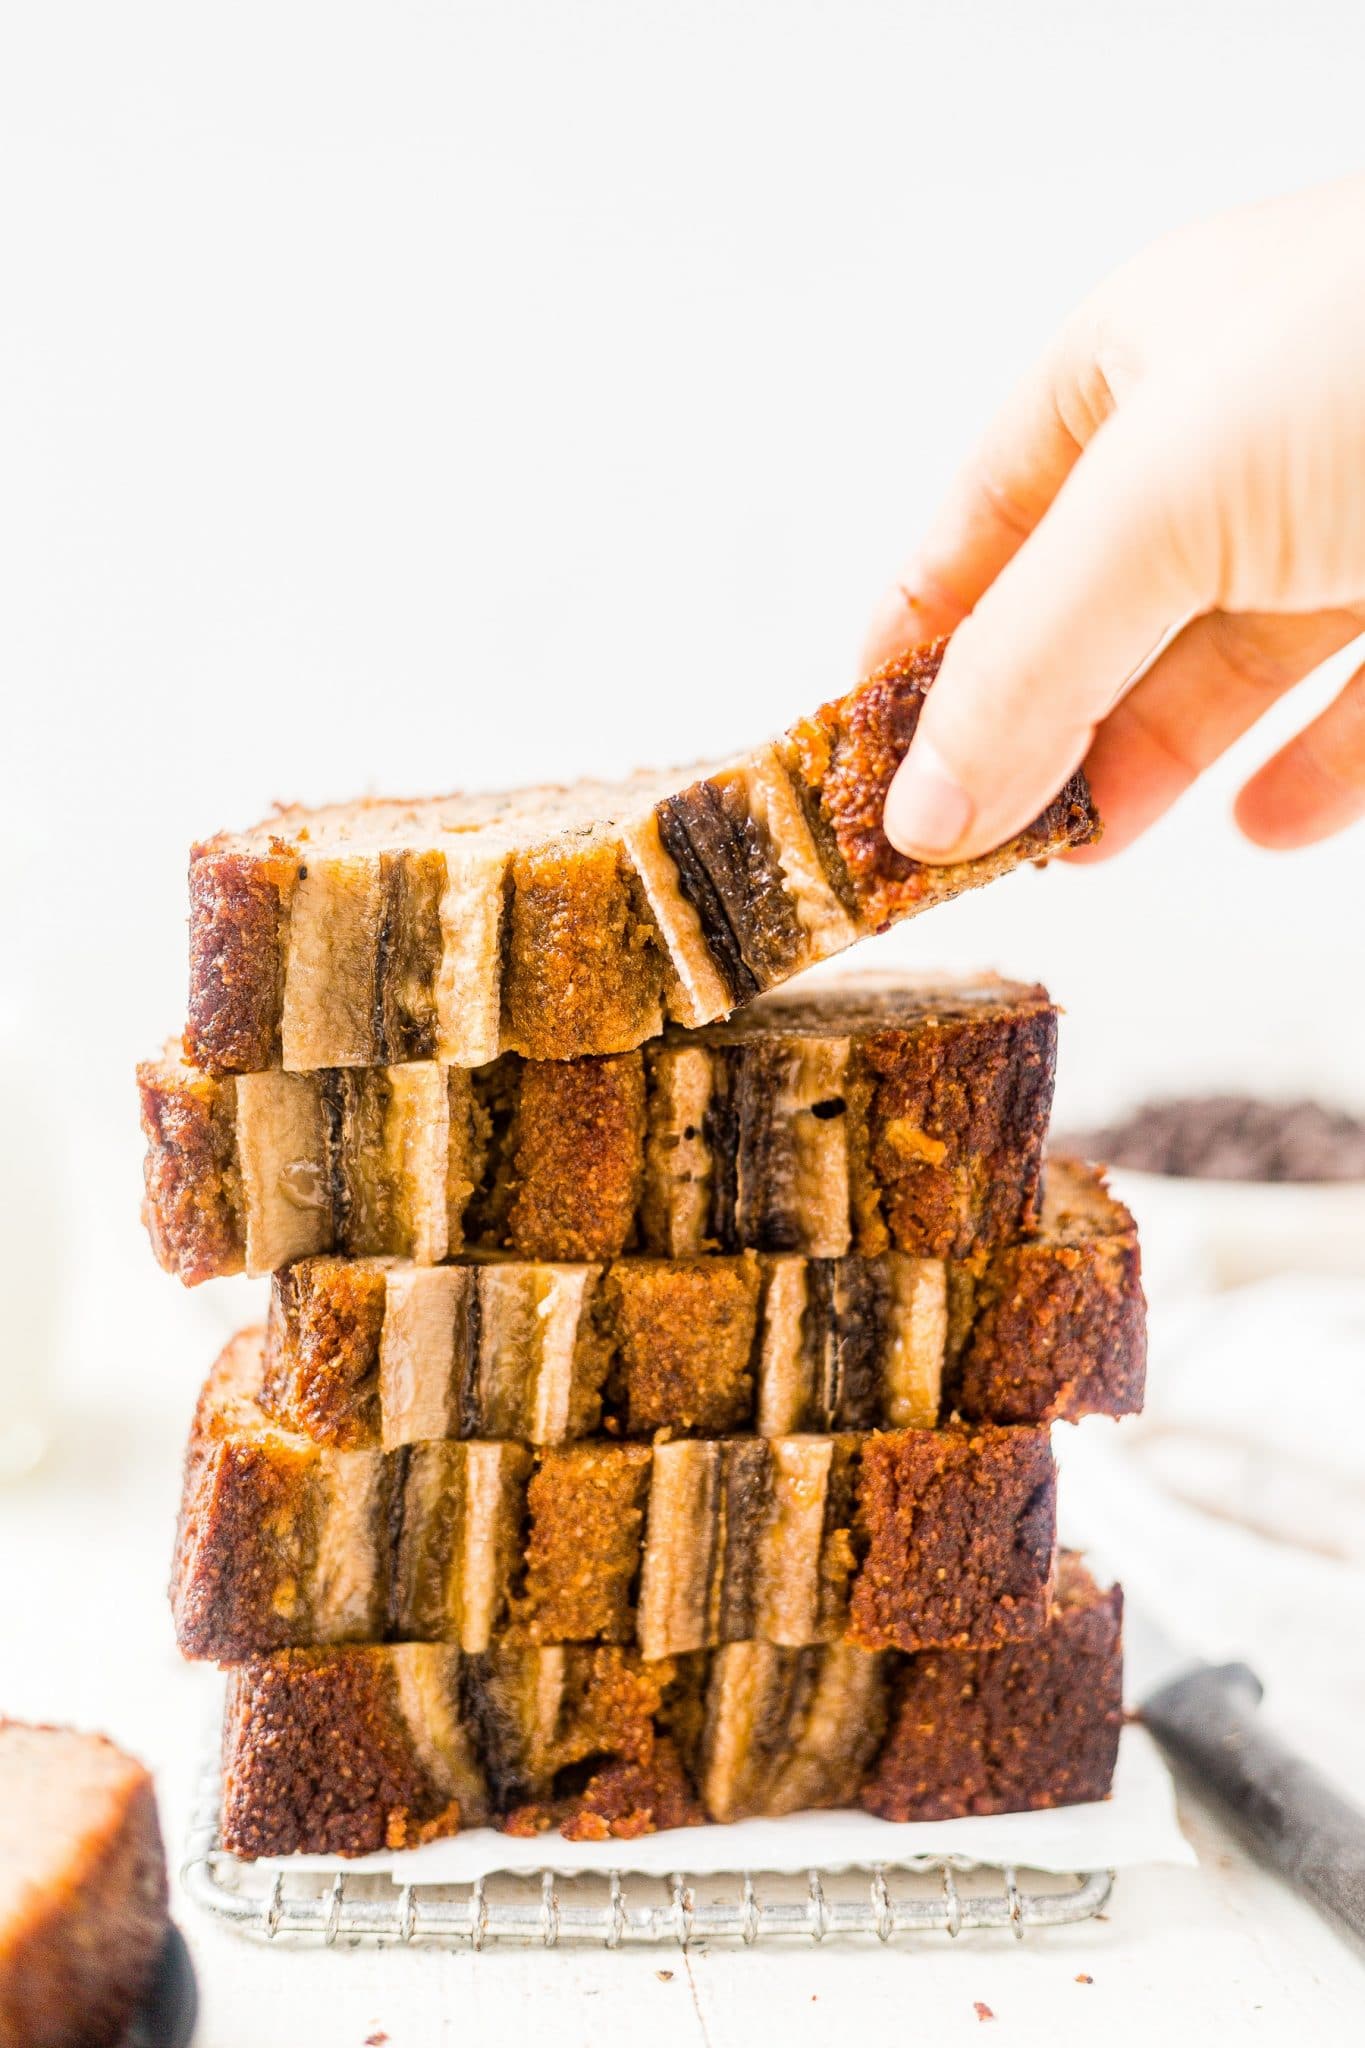 5 slices of banana bread made with almond flour stacked on top of each other with a hand reaching for the top one